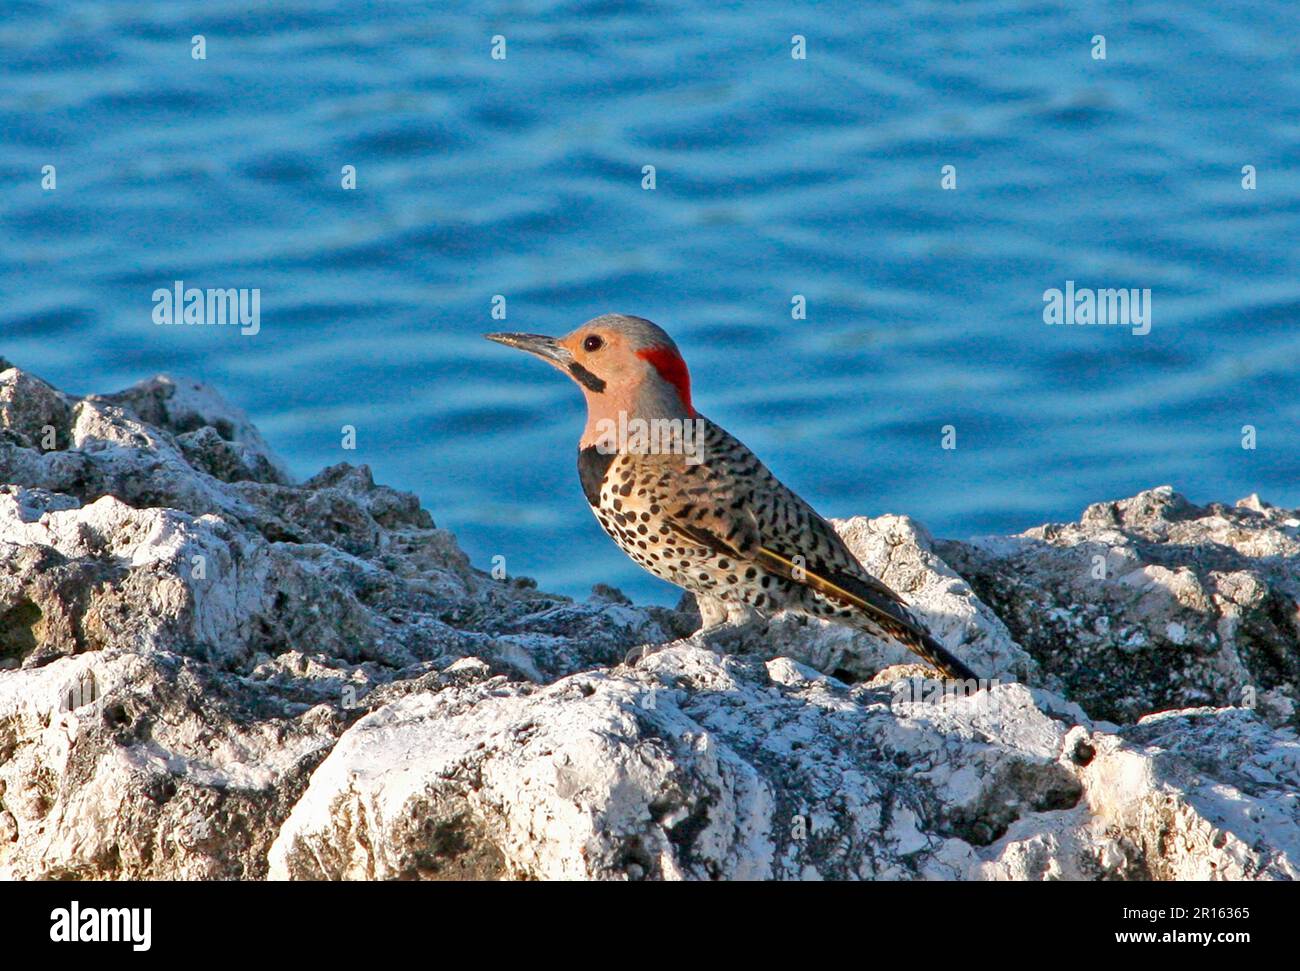 Northern northern flicker (Colaptes auratus) adult male, standing on rocks near the sea, Grand Cayman, Cayman Islands Stock Photo